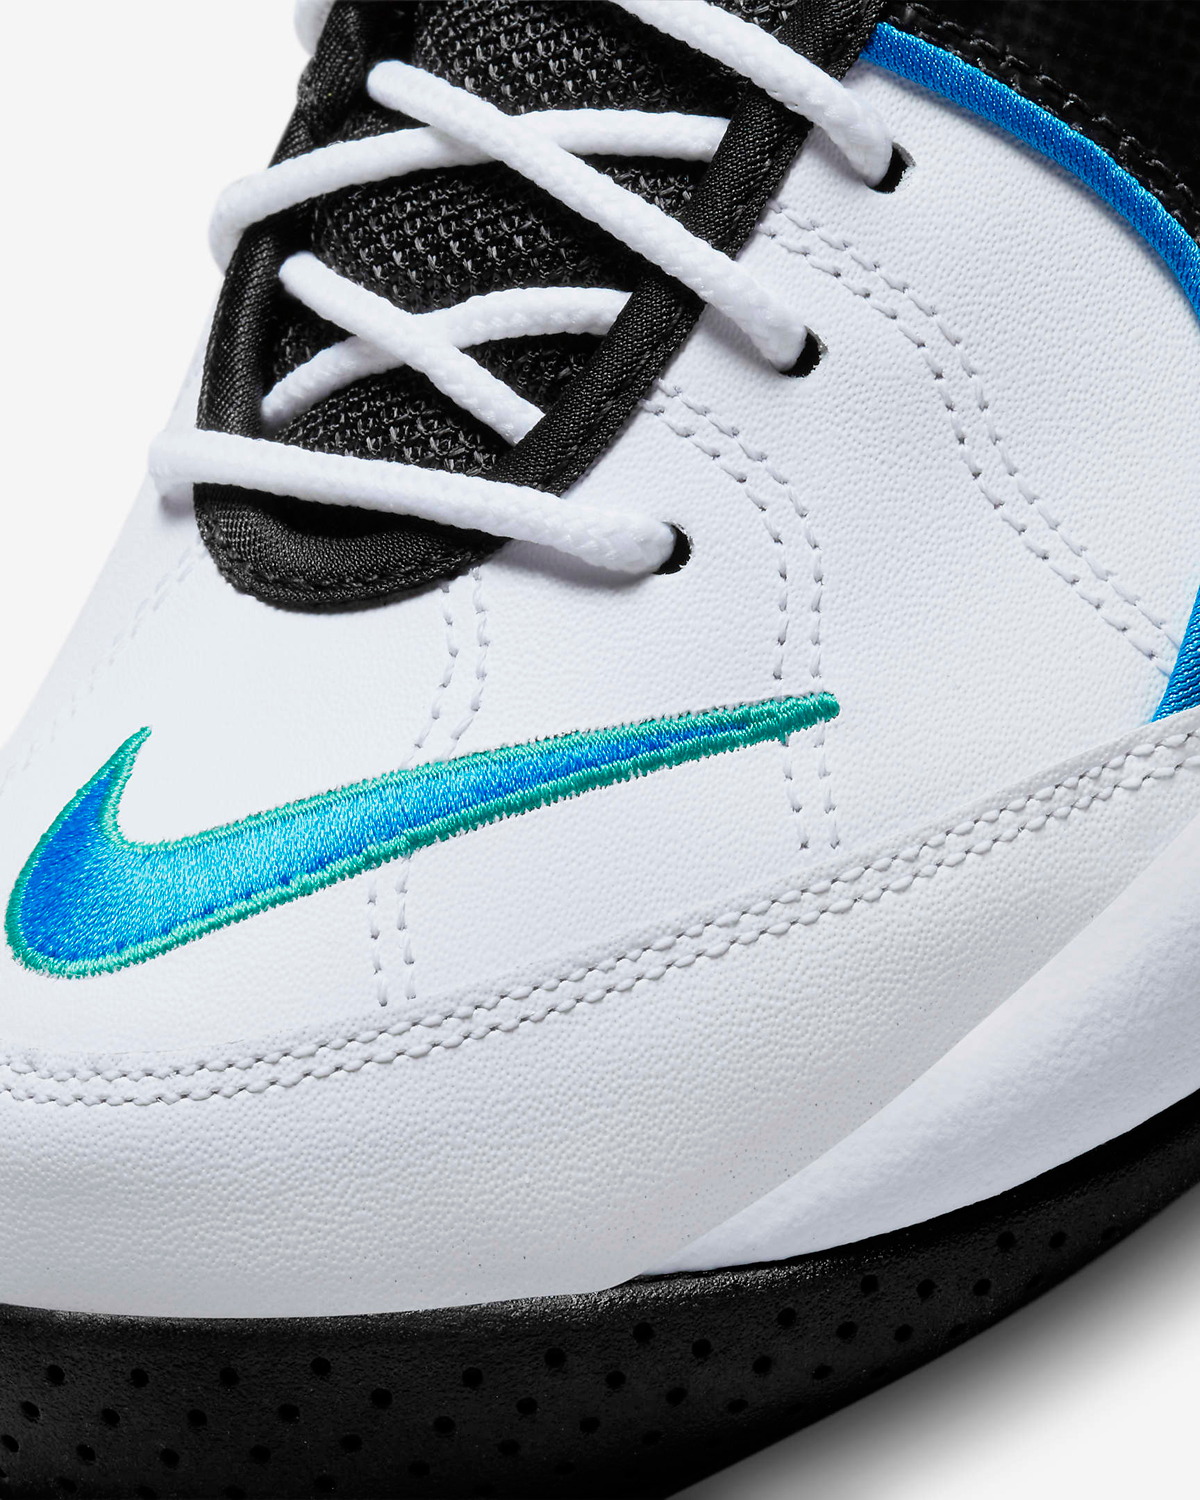 nike-air-zoom-flight-95-white-photo-blue-release-date-7